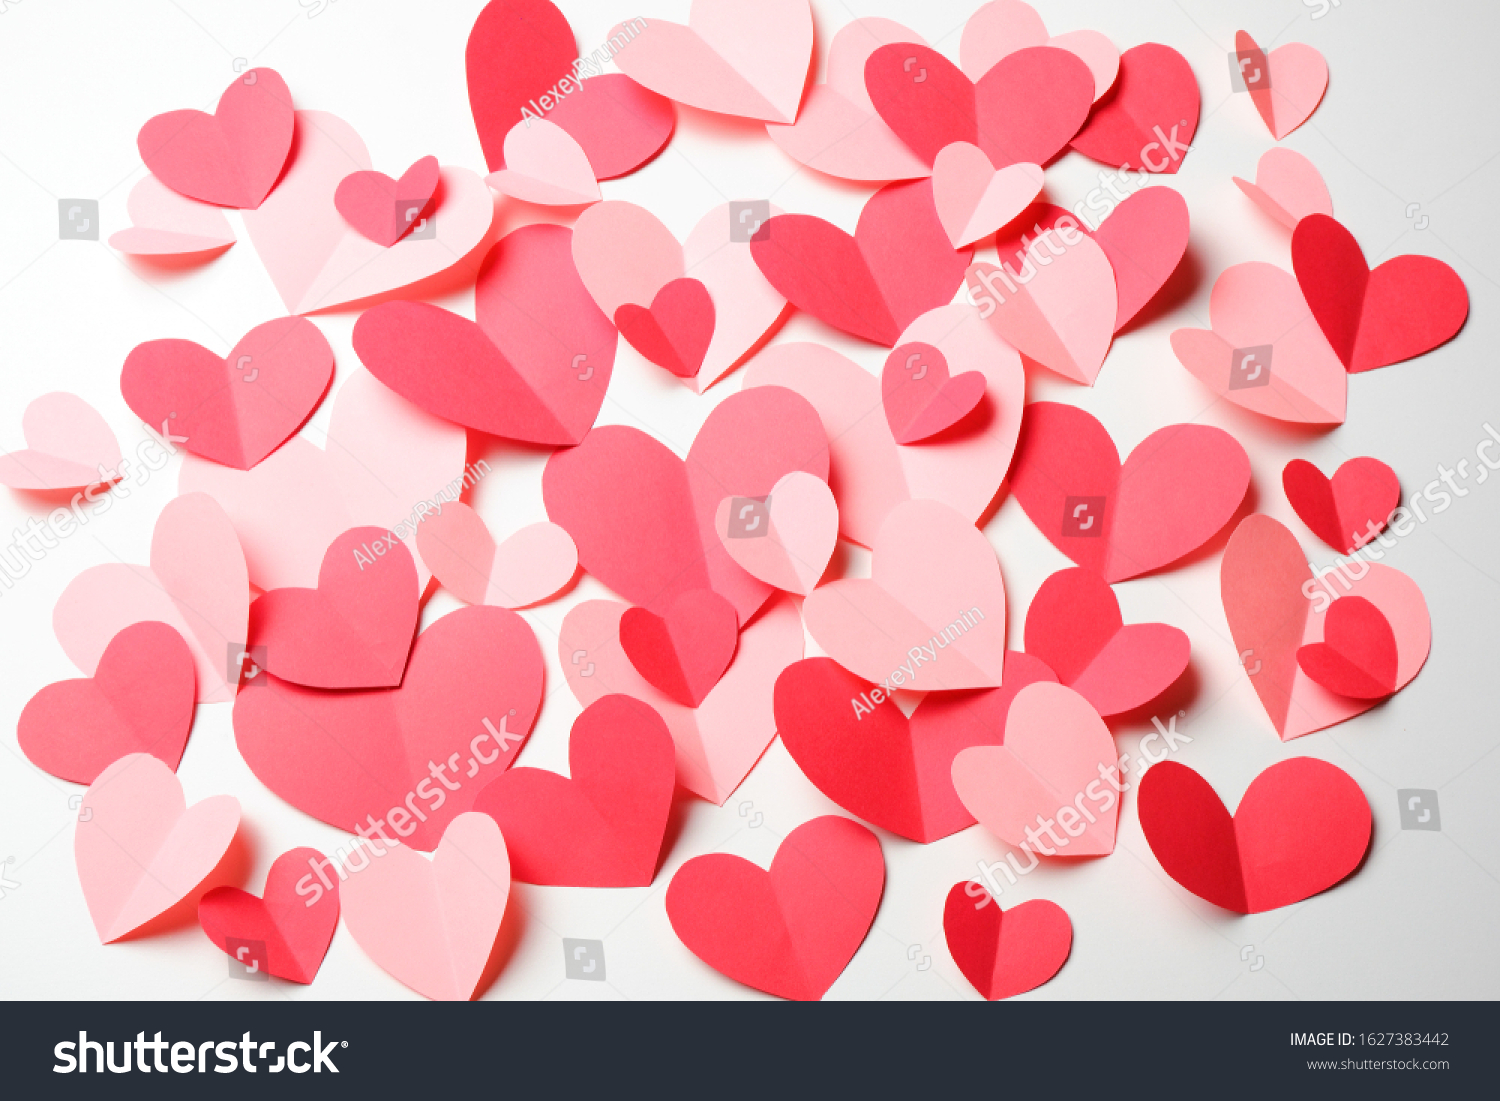 Bunch of cut out of pink and red paper hearts on white background. Good Valentines day, Womans day, love, romantic or wedding card, banner, invitation background for banner, congratulation, card, offer, flyer, advertising, invitation.